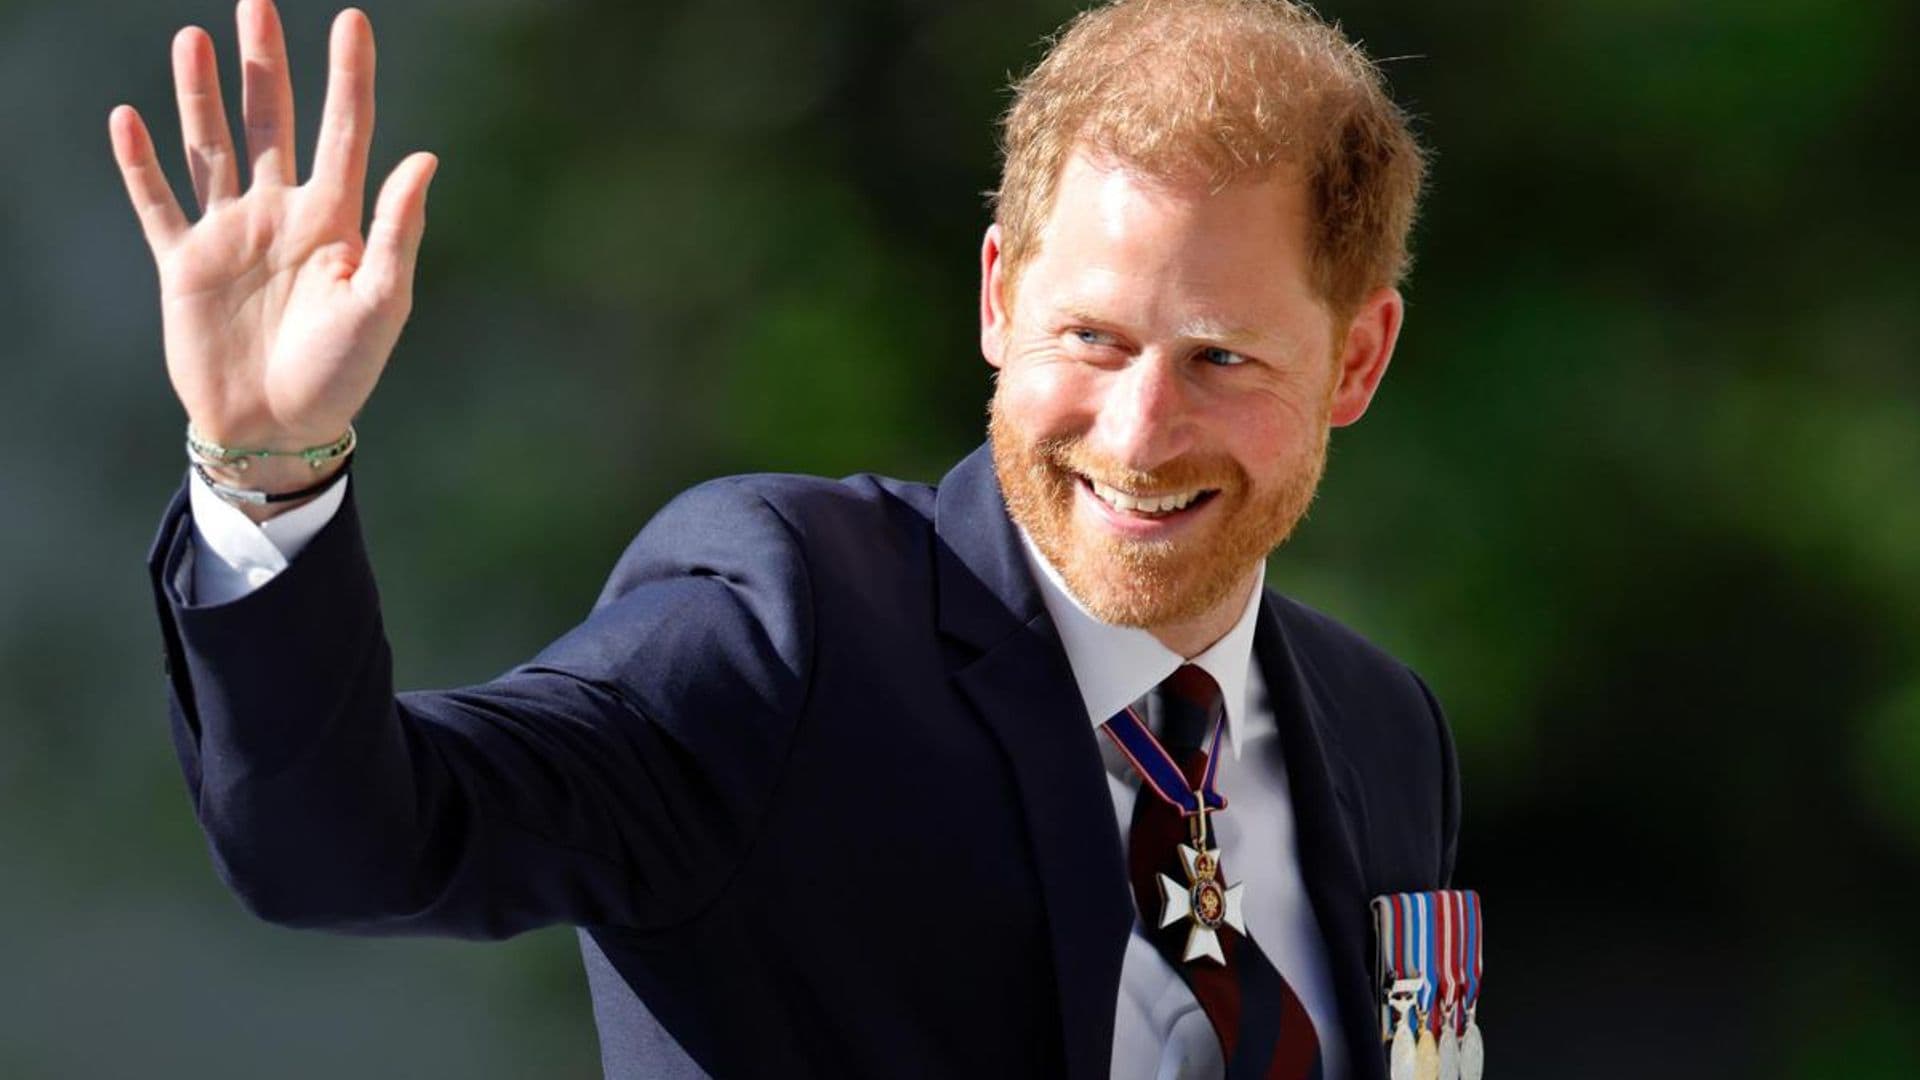 Prince Harry supported by relatives in London: Find out who